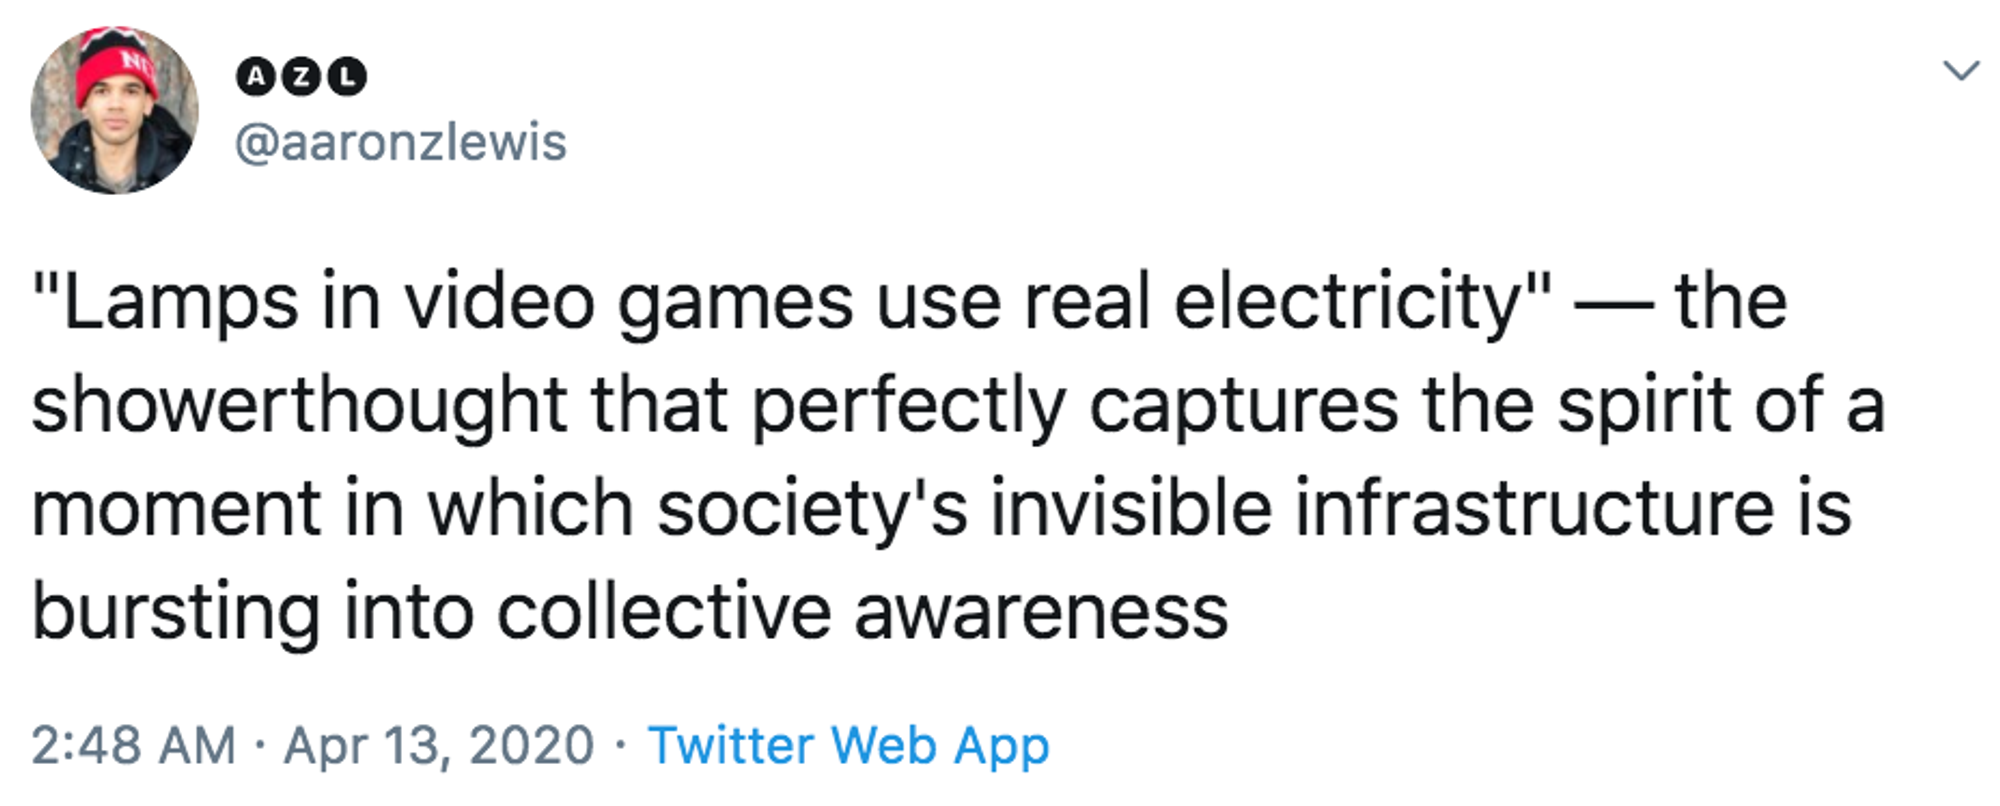 Lamps in video games use real electricity